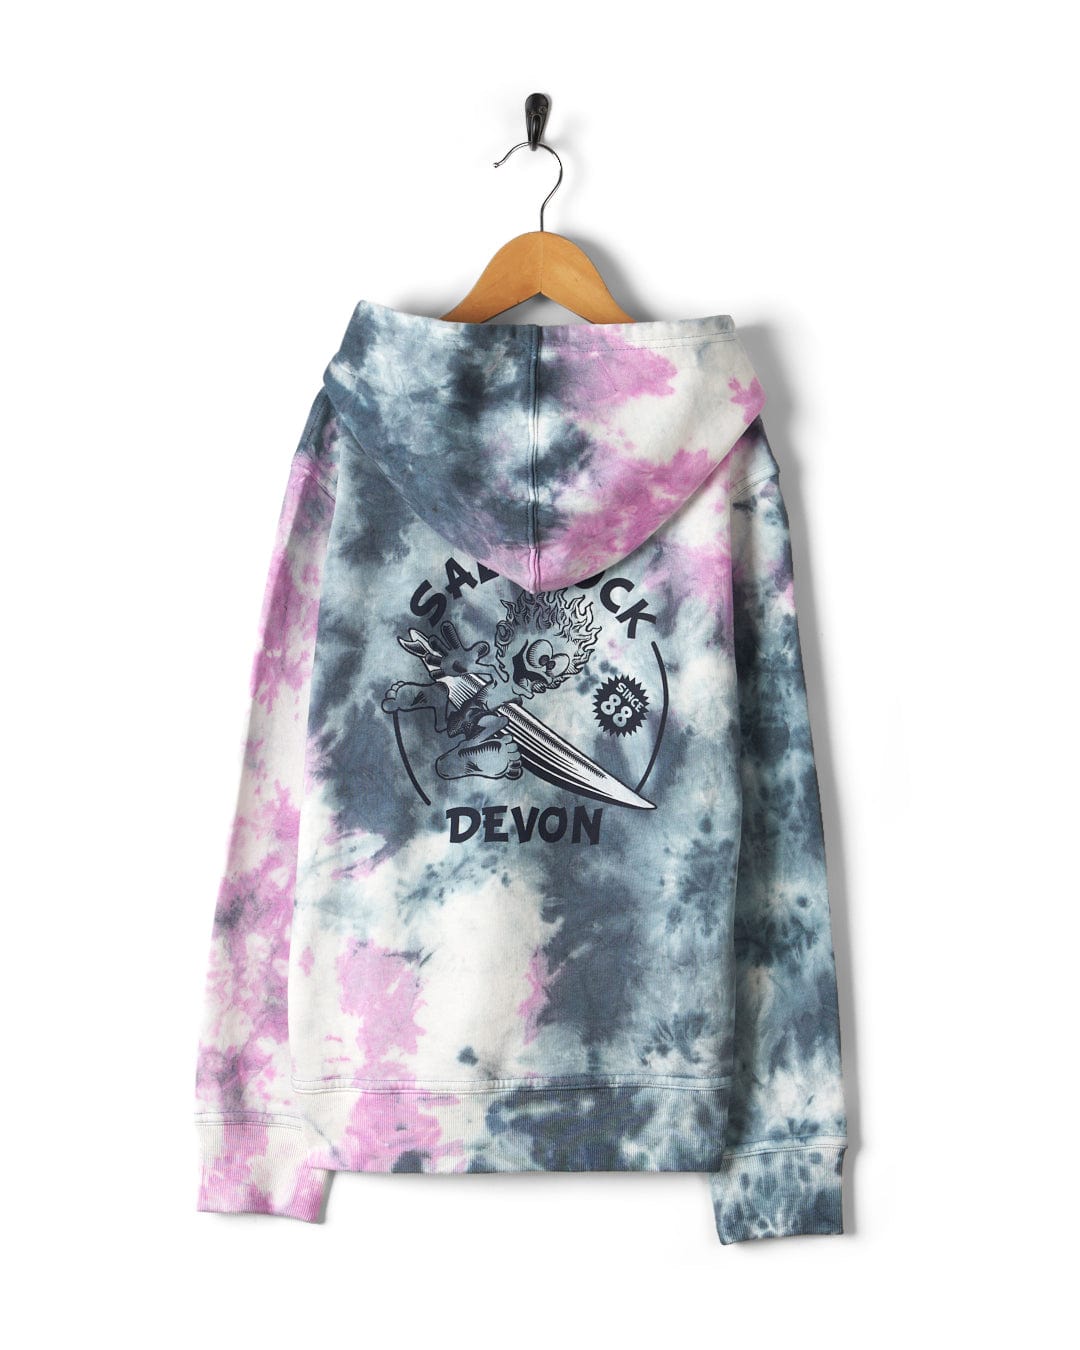 A Wave Rider Devon tie dye pop hoodie with the word devil on it, made of Cotton.